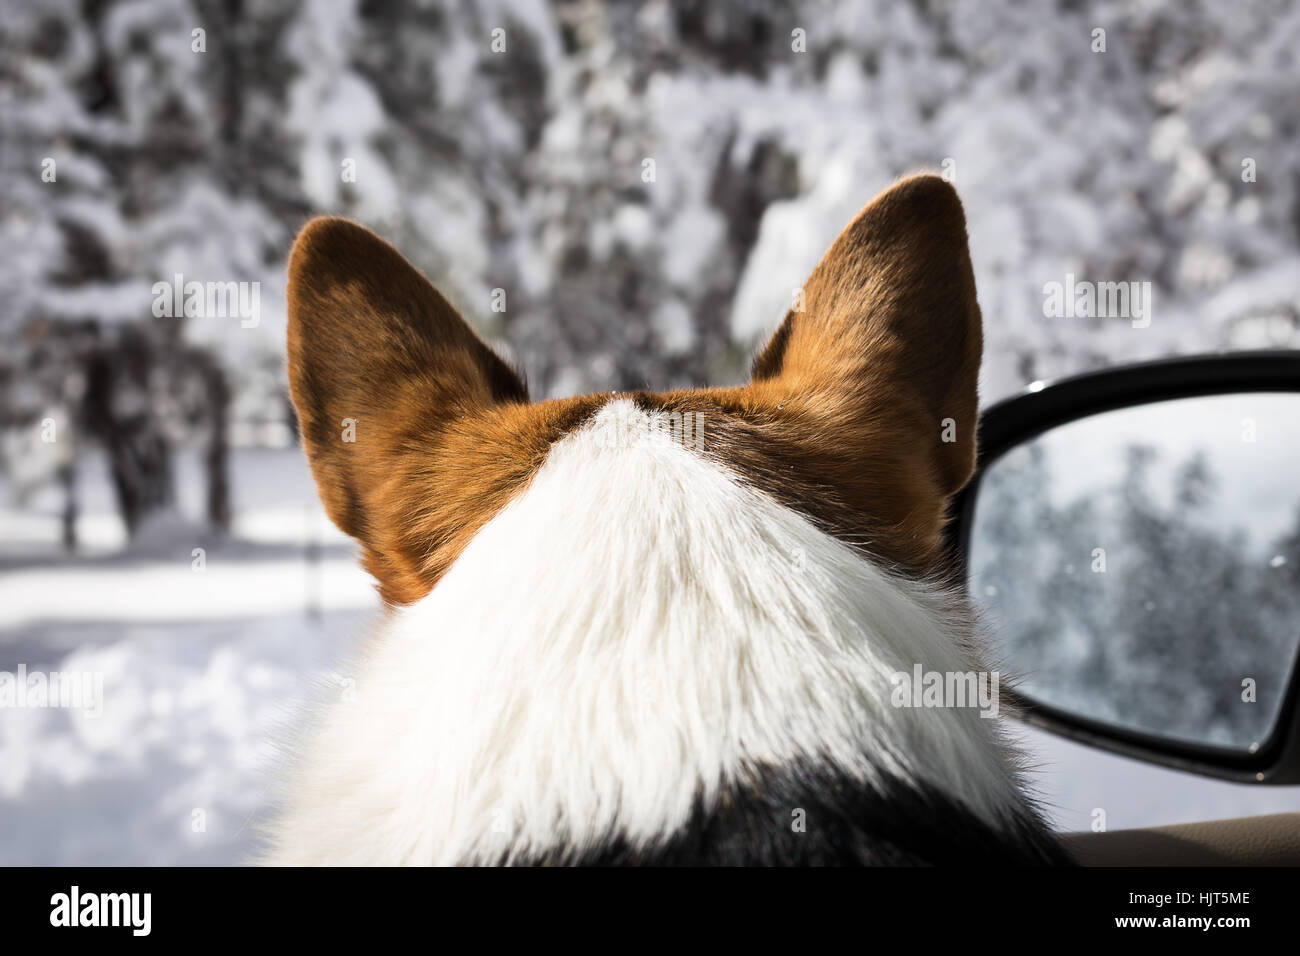 Welsh corgi looking out the window of a car at fresh snow Stock Photo